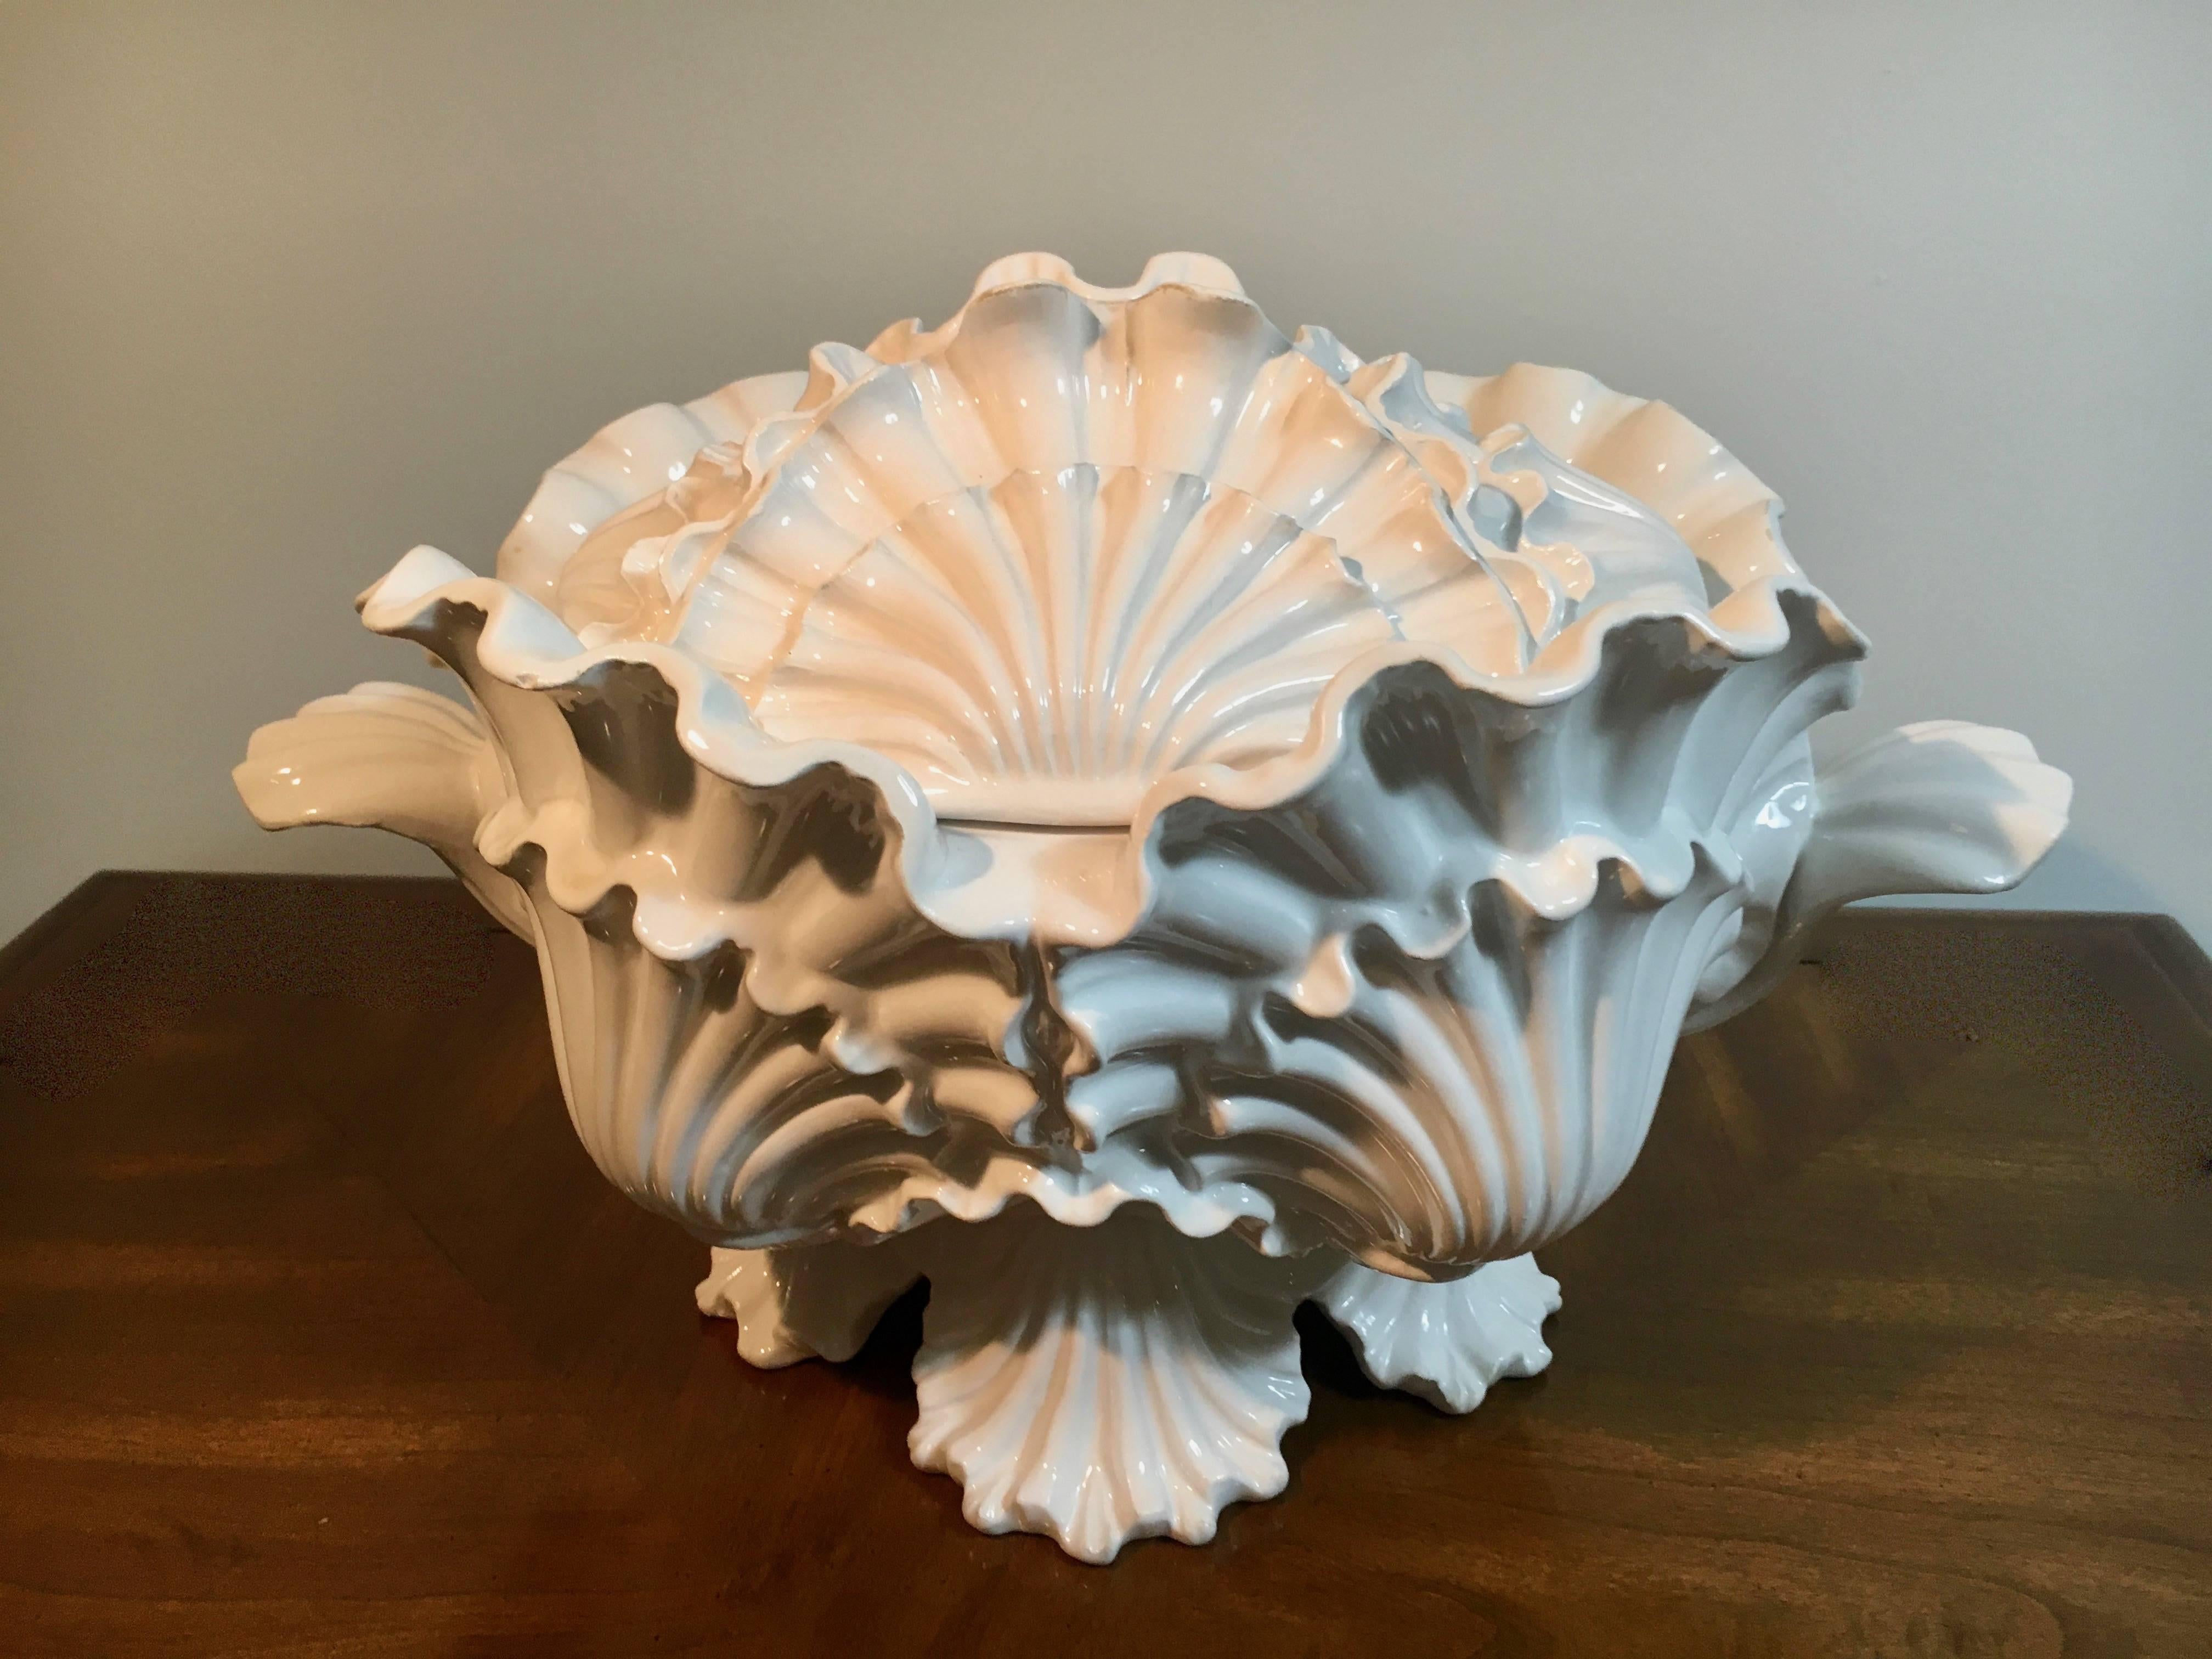 Italian ceramic shell motif soup tureen, a beautifully designed piece, perfect for your home by the ocean or water or to serve your families lobster bisque or clam chowder recipes!